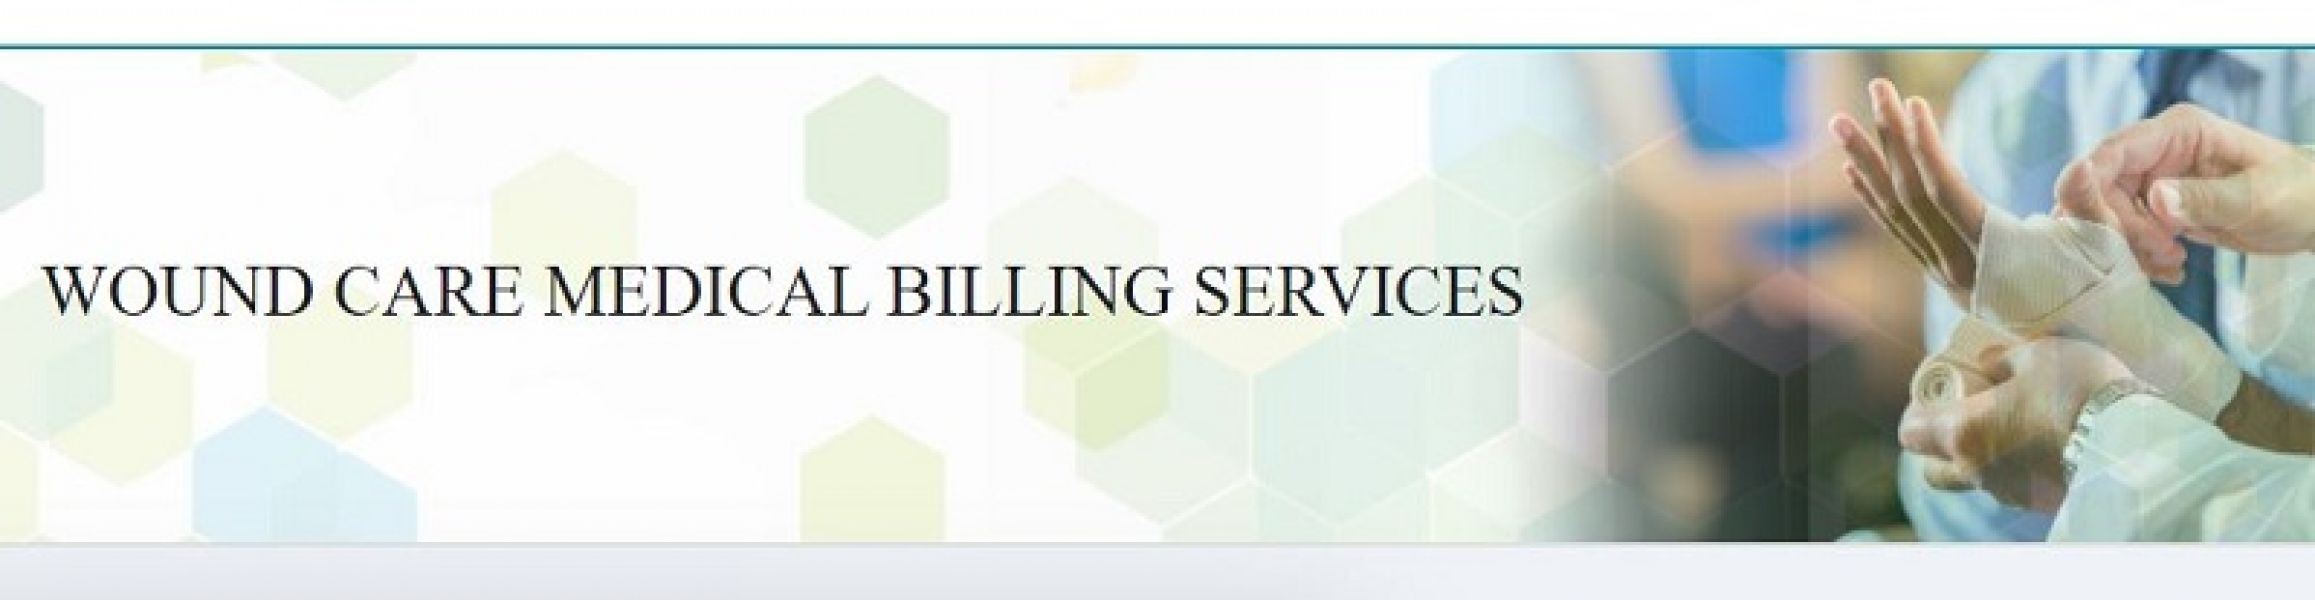 Leading Wound Care Billing Services Provider Nationally